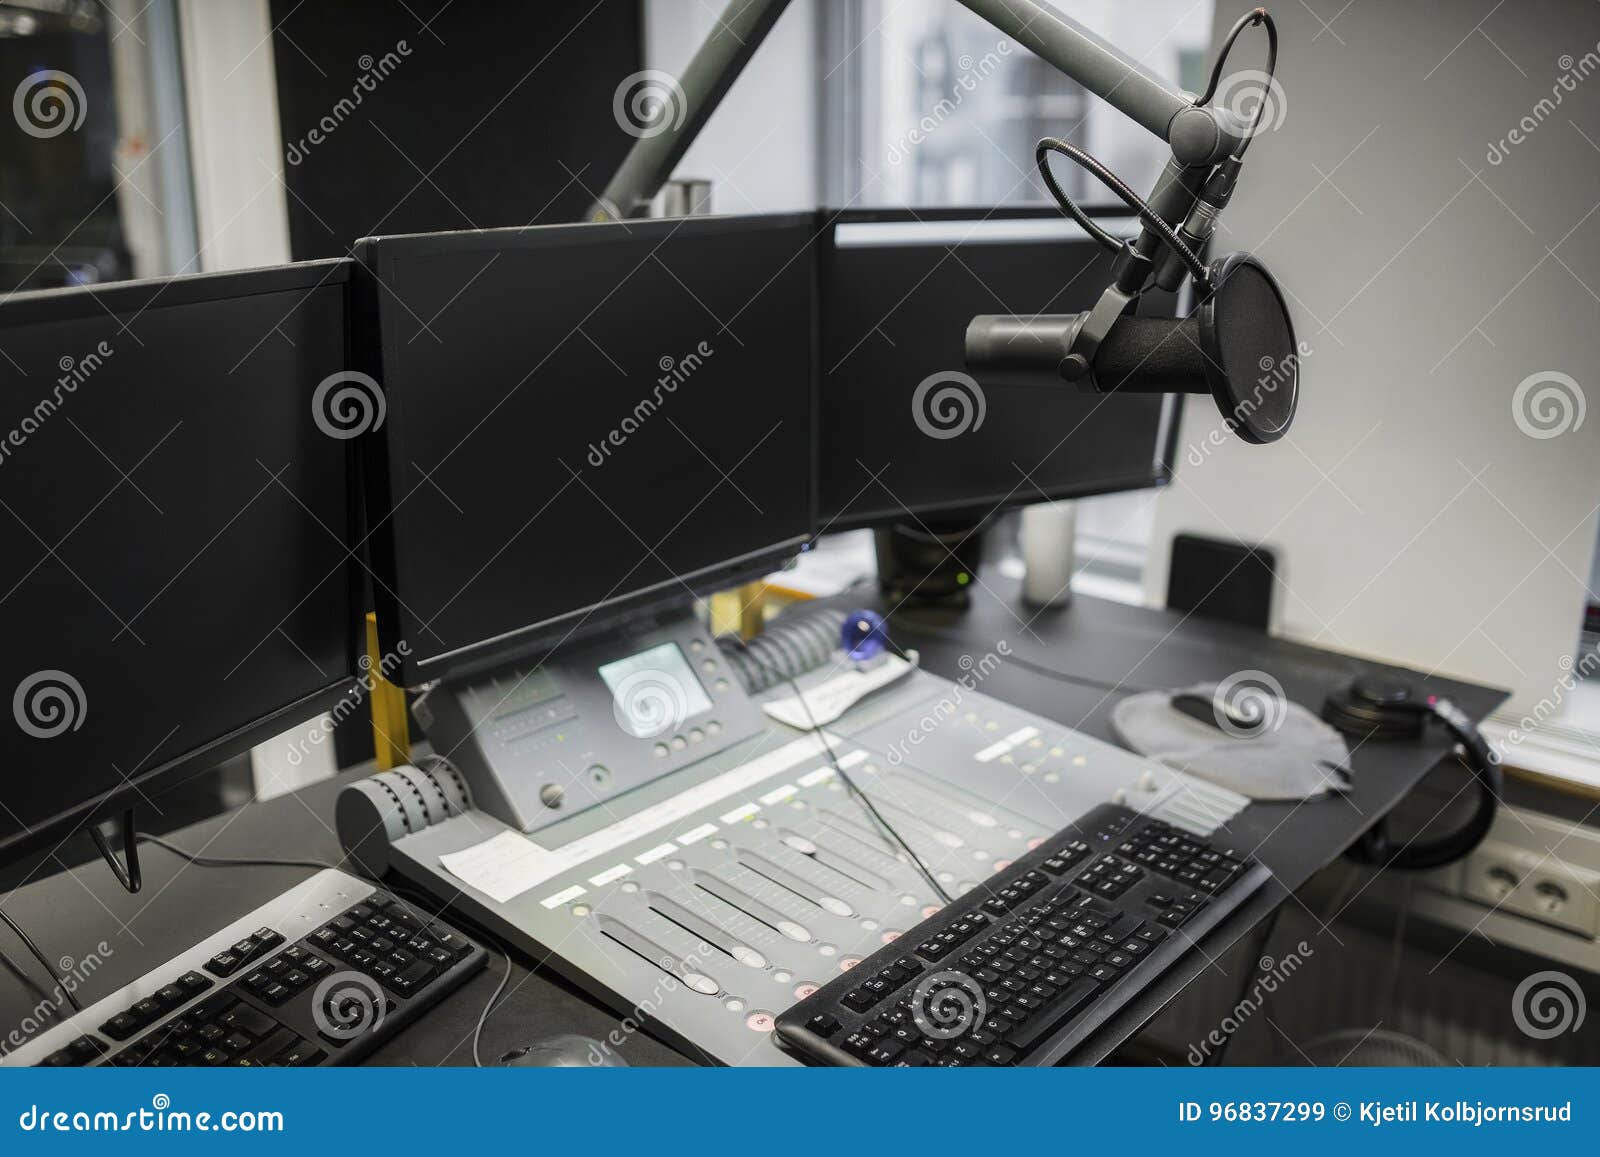 Monitors And Microphone Over Table In Radio Studio Stock Image